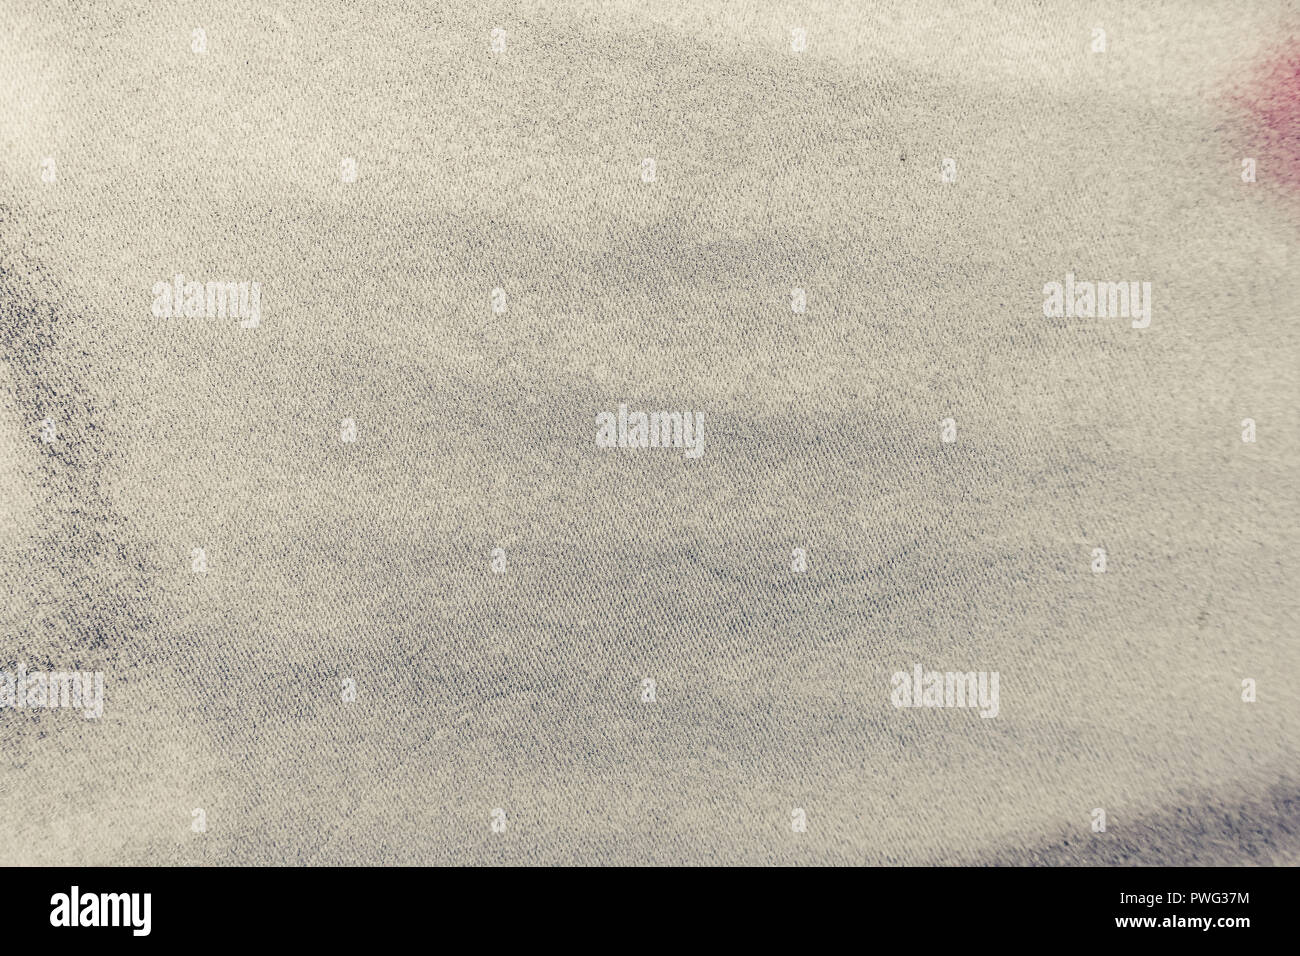 large grunge textures and backgrounds, perfect background with space for text or image Stock Photo